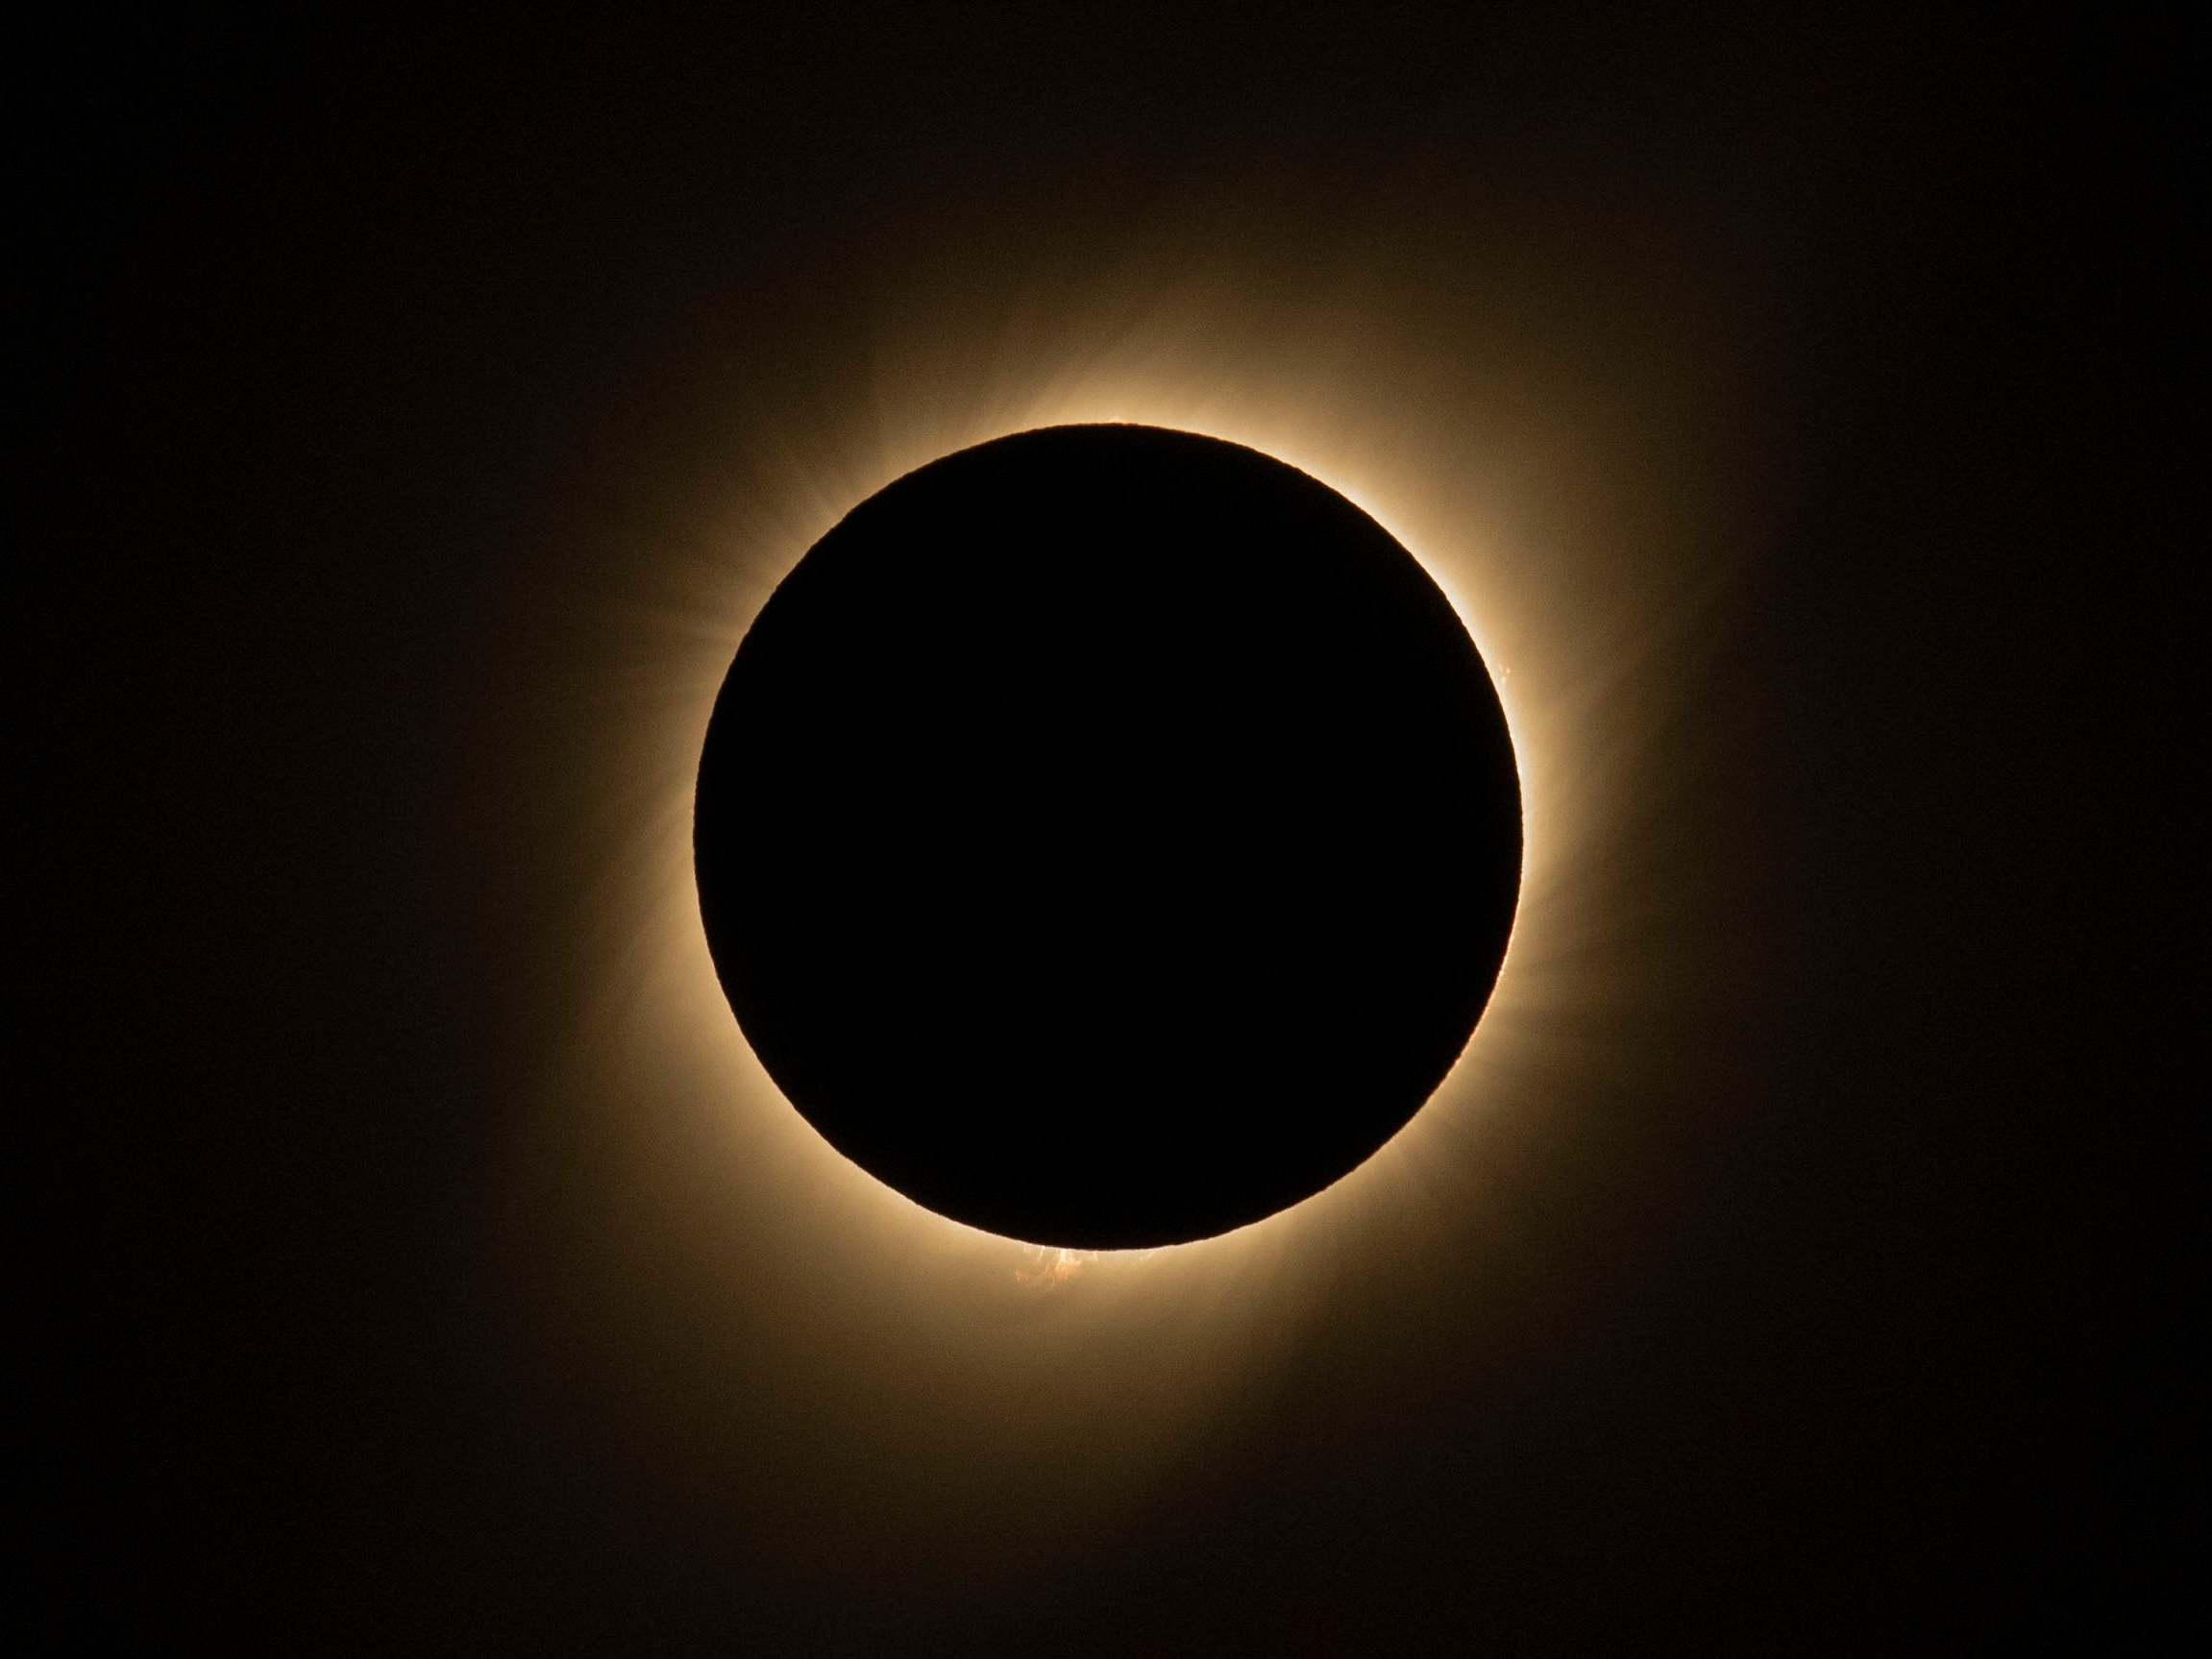 The solar eclipse as seen from the La Silla European Southern Observatory